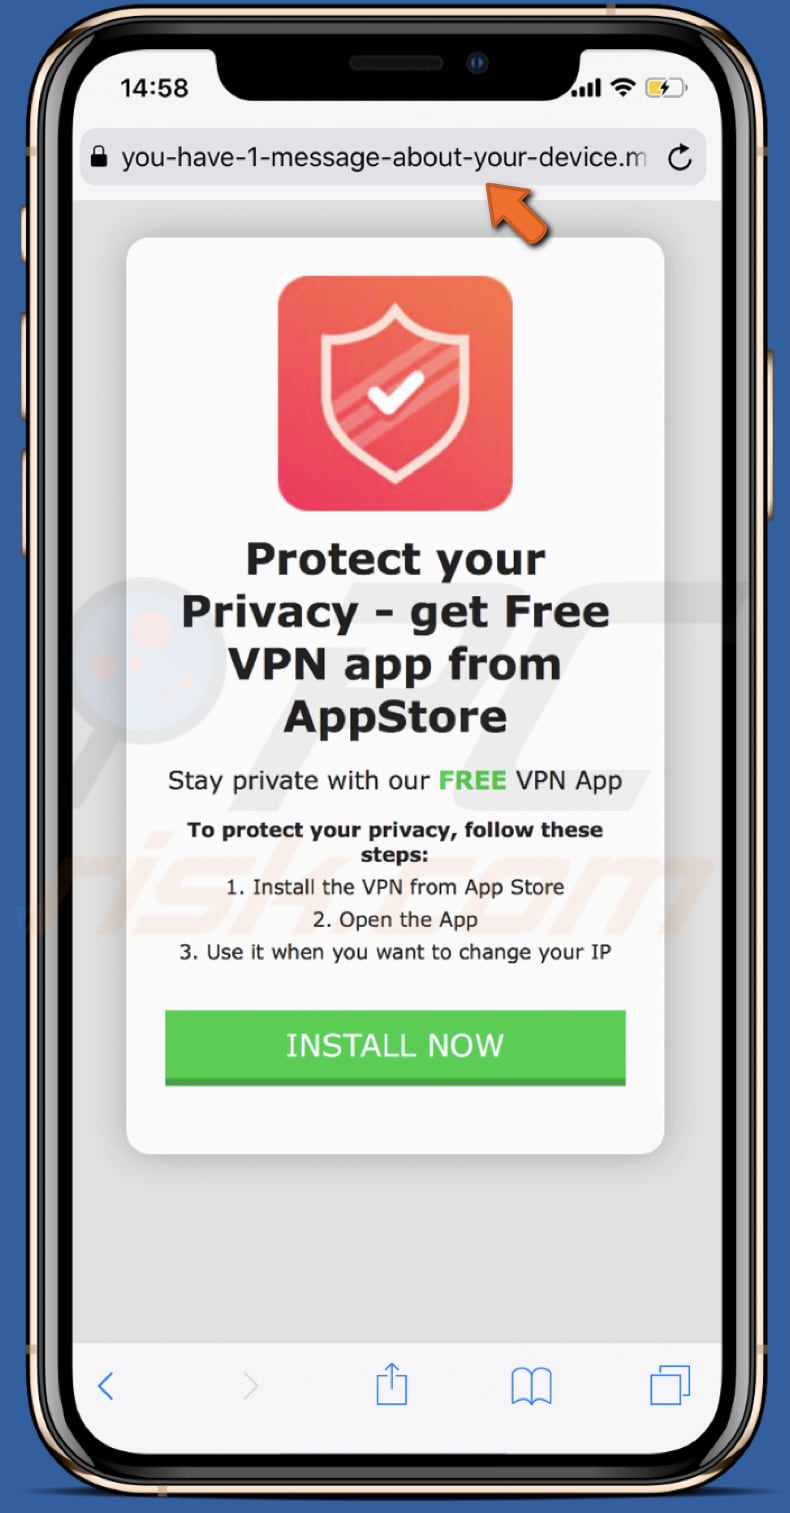 you-have-1-message-about-your-device promoted VPN